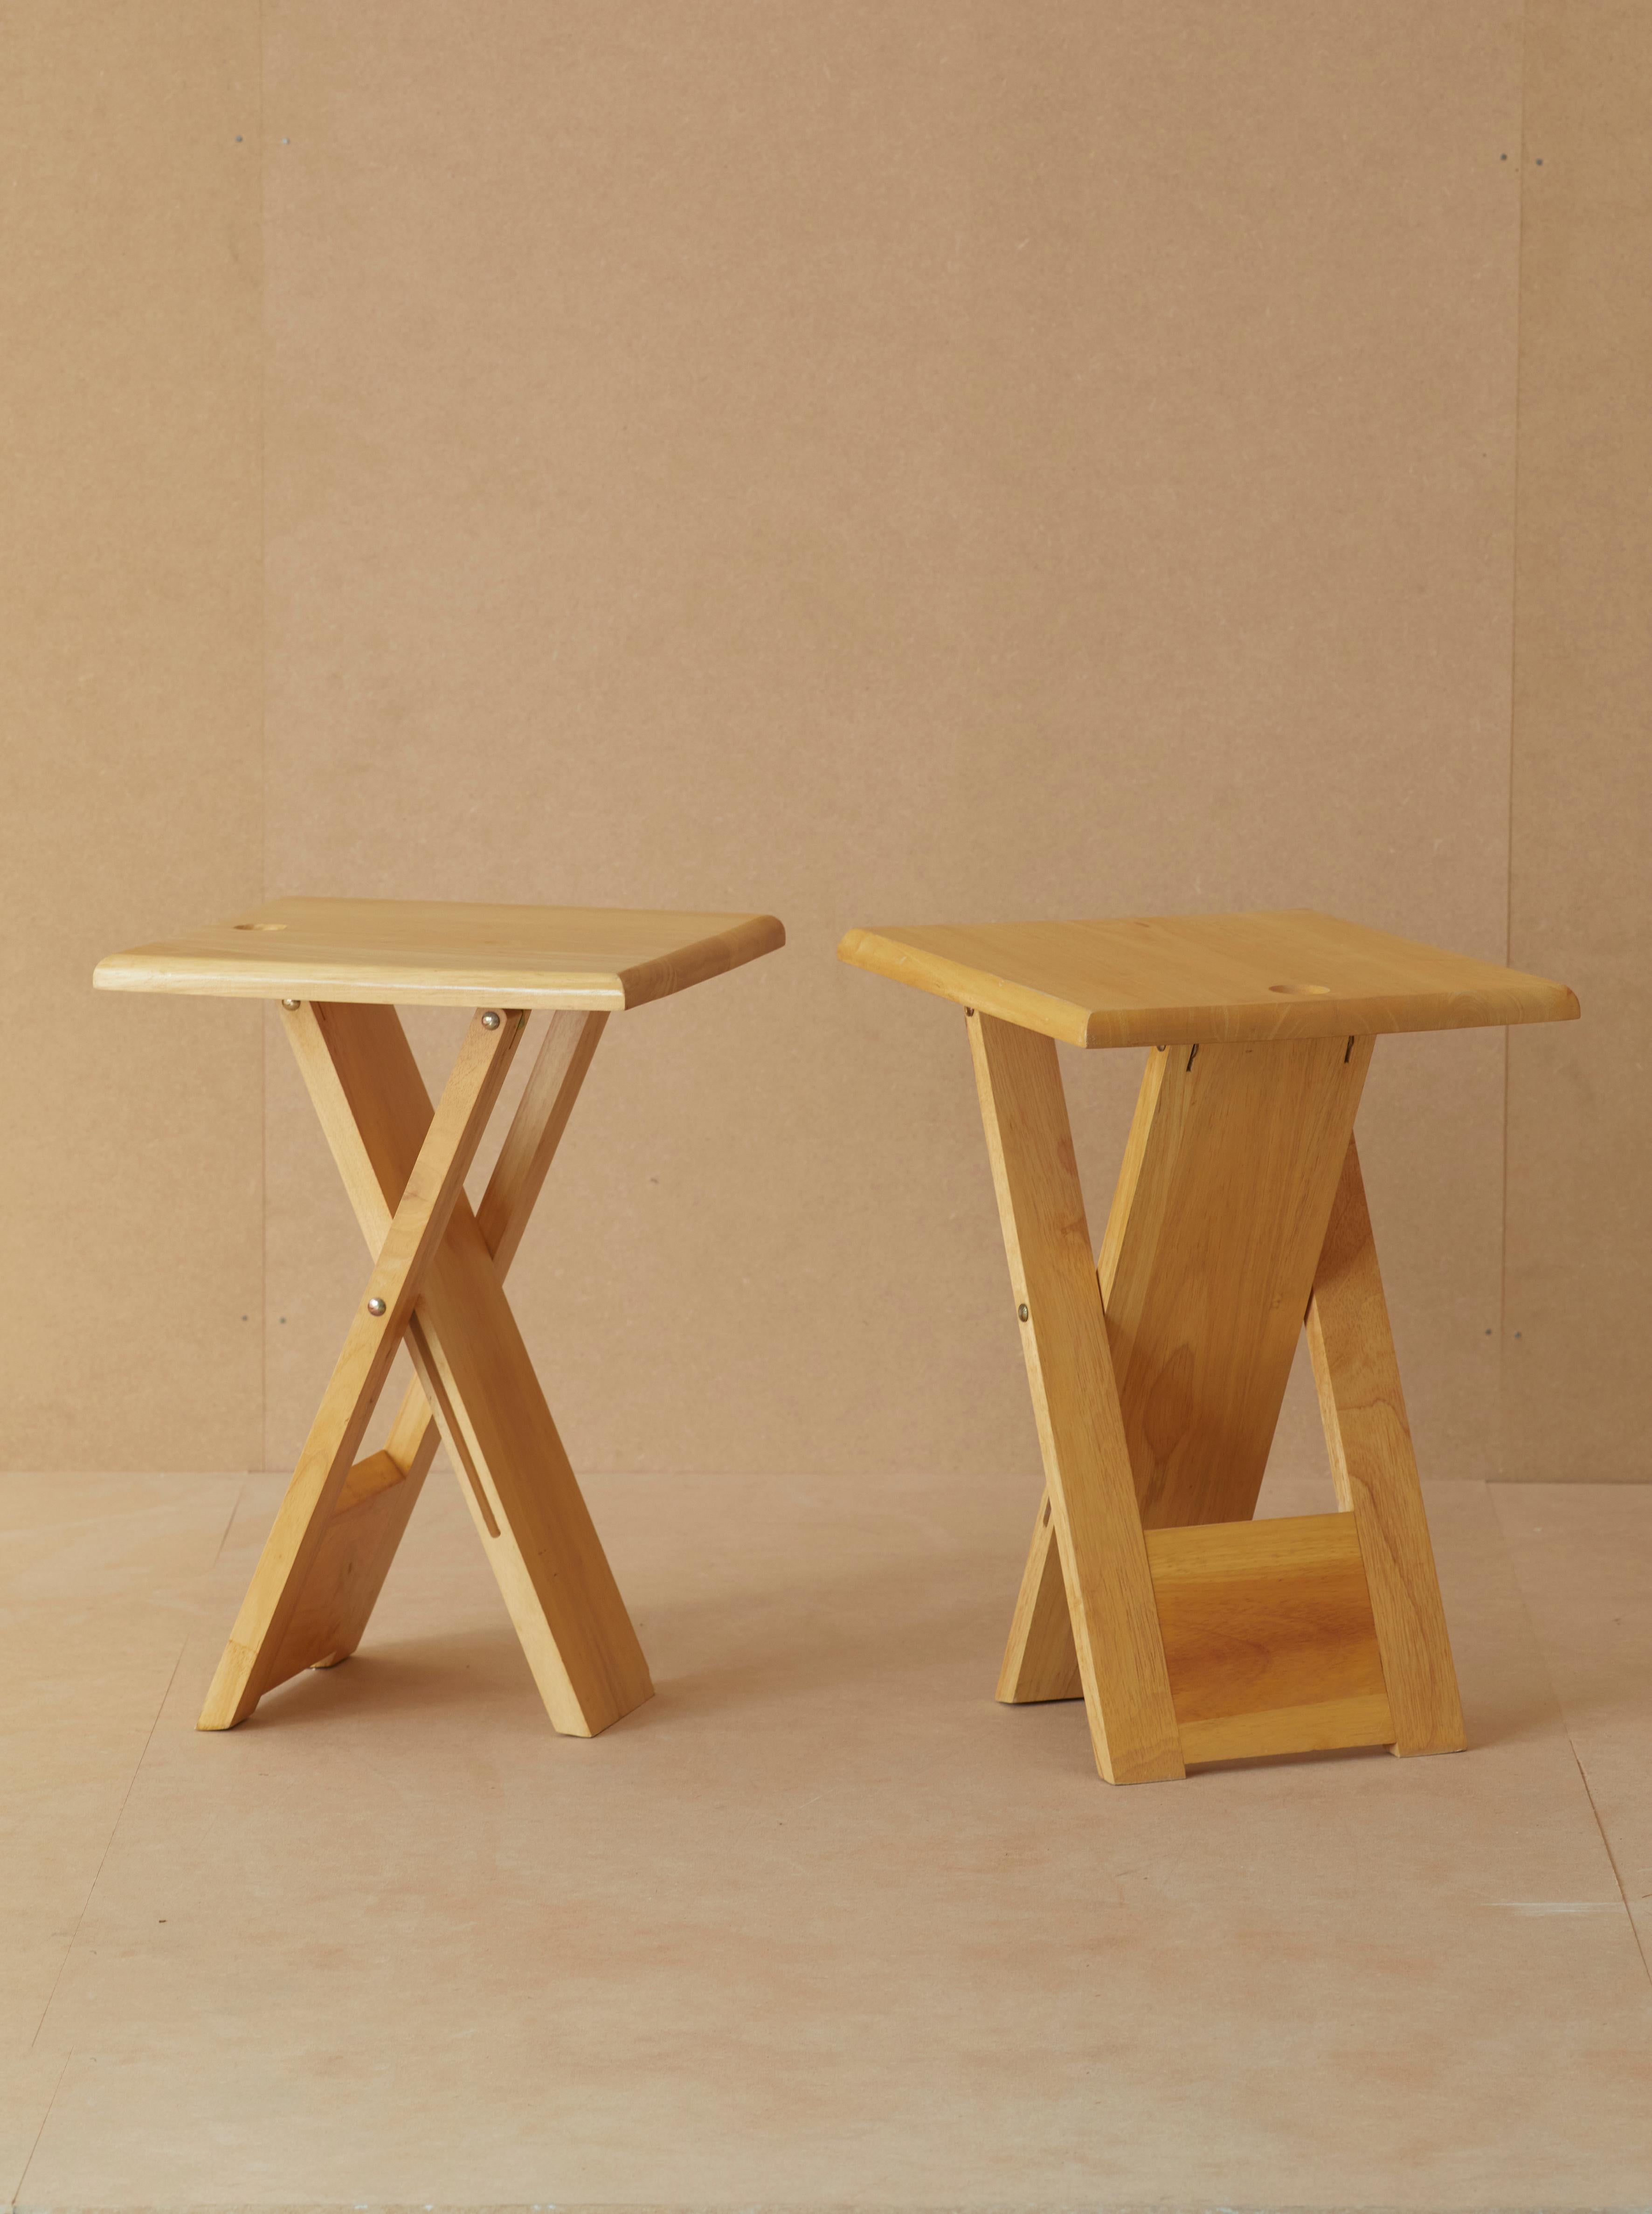 Two folding stools edited by Artefact France (marked) in the 1970s, in the taste of the creations of Adrian Reed and Roger Tallon.

A smart and practical design in solid beech wood that can be folded and hung.  

A rare set in this squared version.